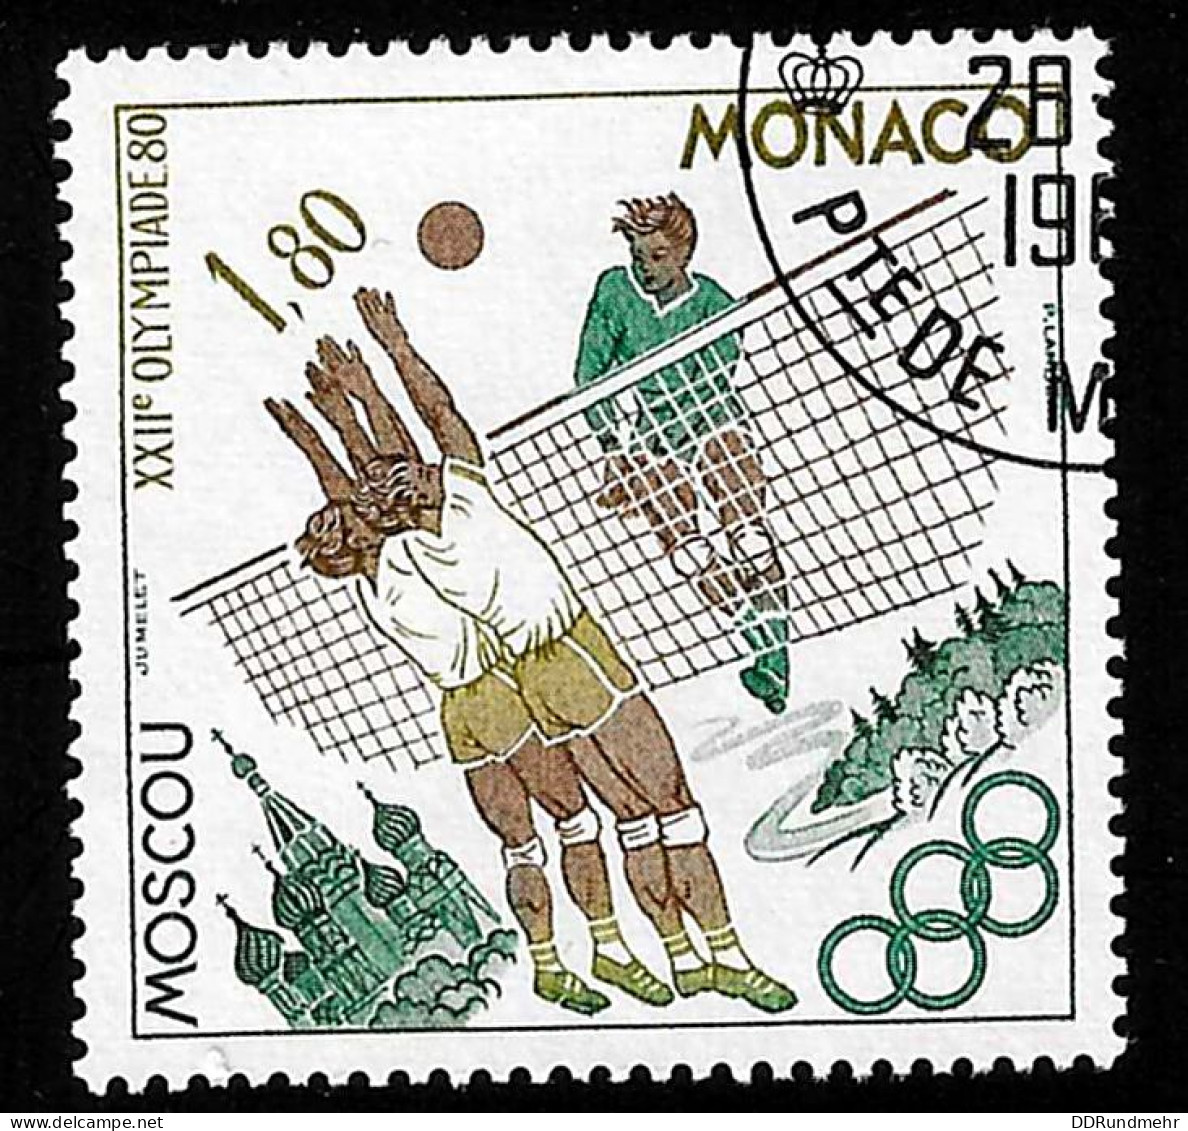 1980  Volleyball Michel MC 1418 Stamp Number MC 1224 Yvert Et Tellier MC 1221 Stanley Gibbons MC 1438 Used - Usados